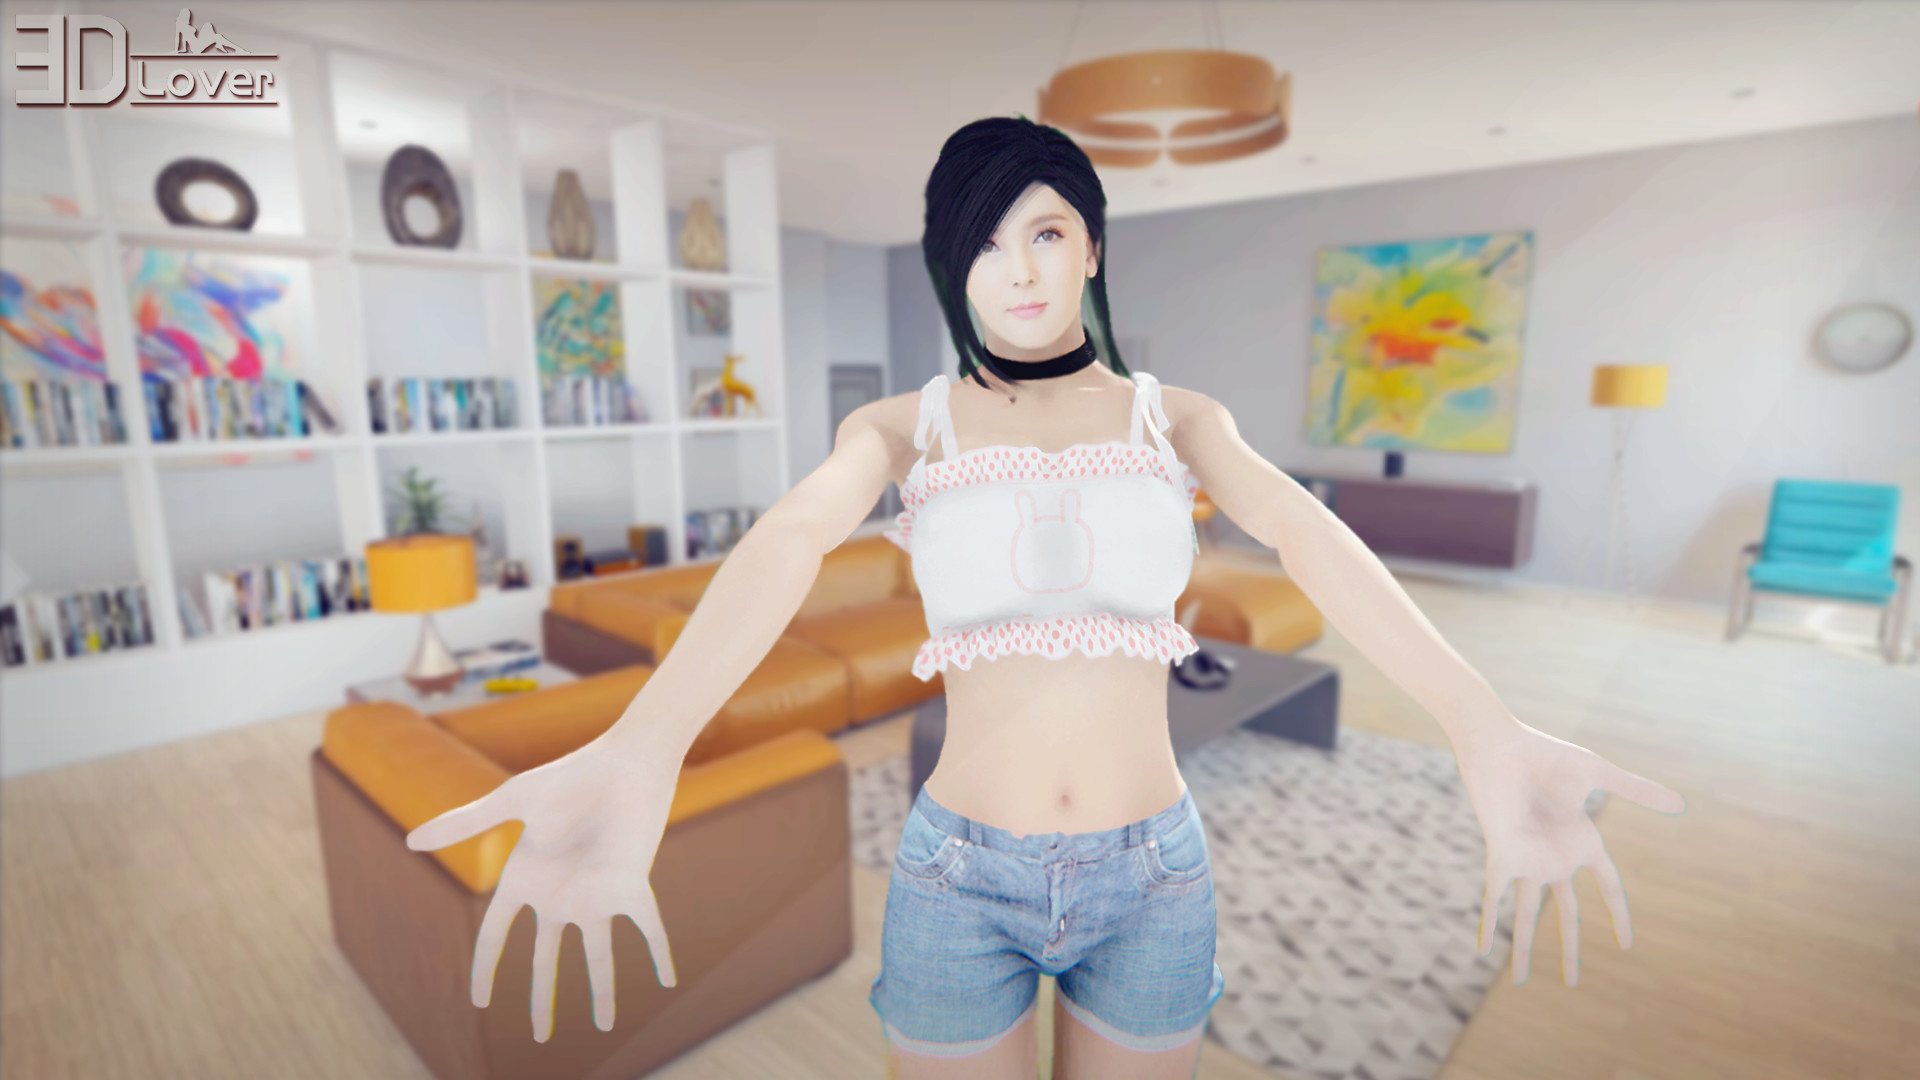 3D  Lover Free Download